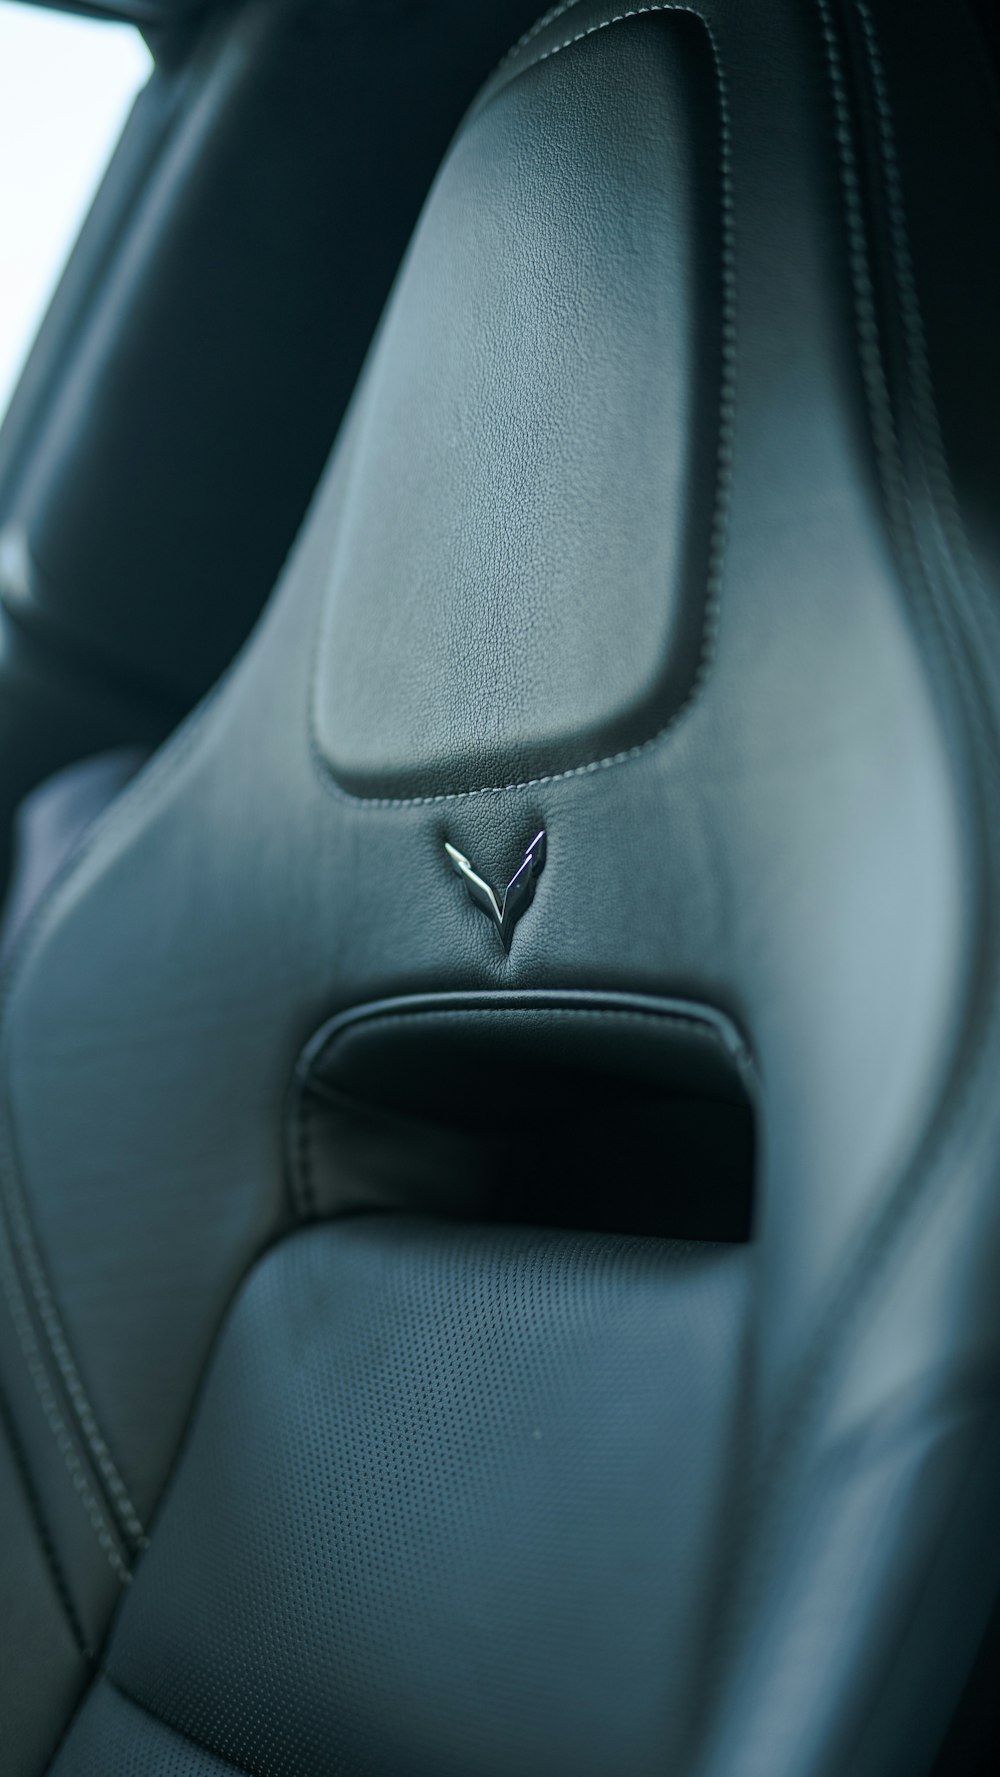 a close up of a car's leather seats